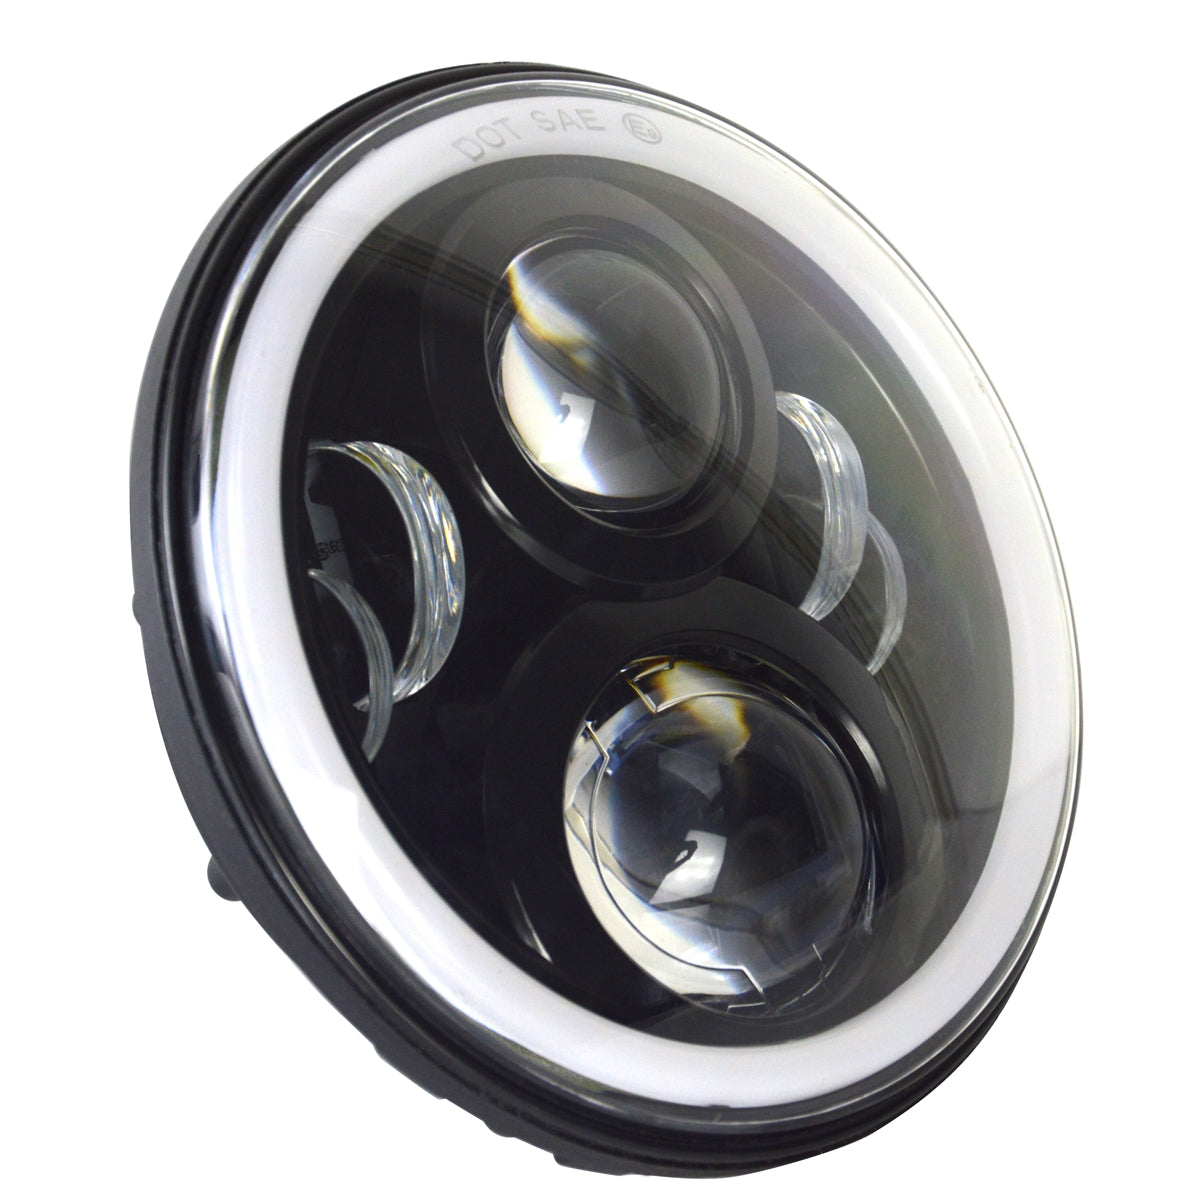 NVE Off Road 66 SERIES 7" Halo Headlights White - Amber halos (100W) for 07-18 Jeep Wrangler JK